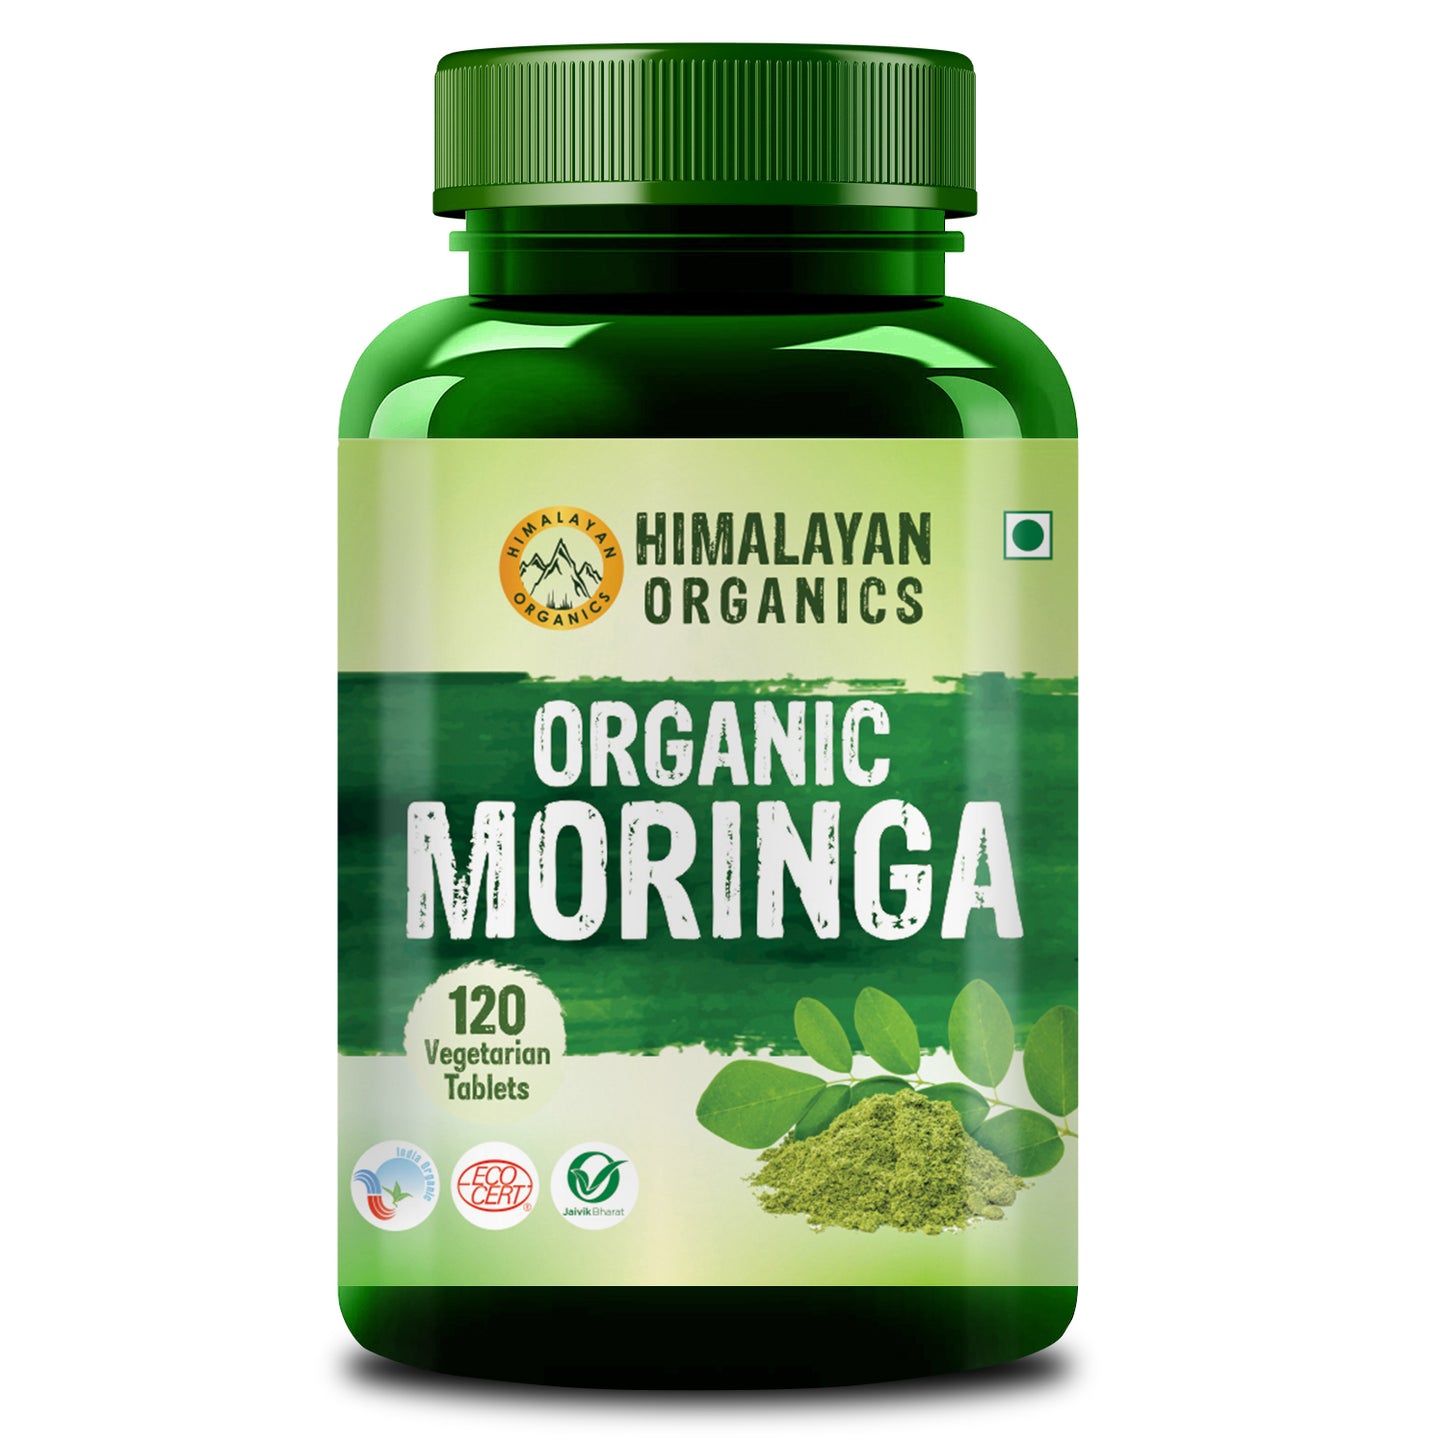 Himalayan Organics Organic Moringa/Drumstick Leaf Powder Tablets | Nutrient-rich Daily Natural Superfood (120 Tablets)